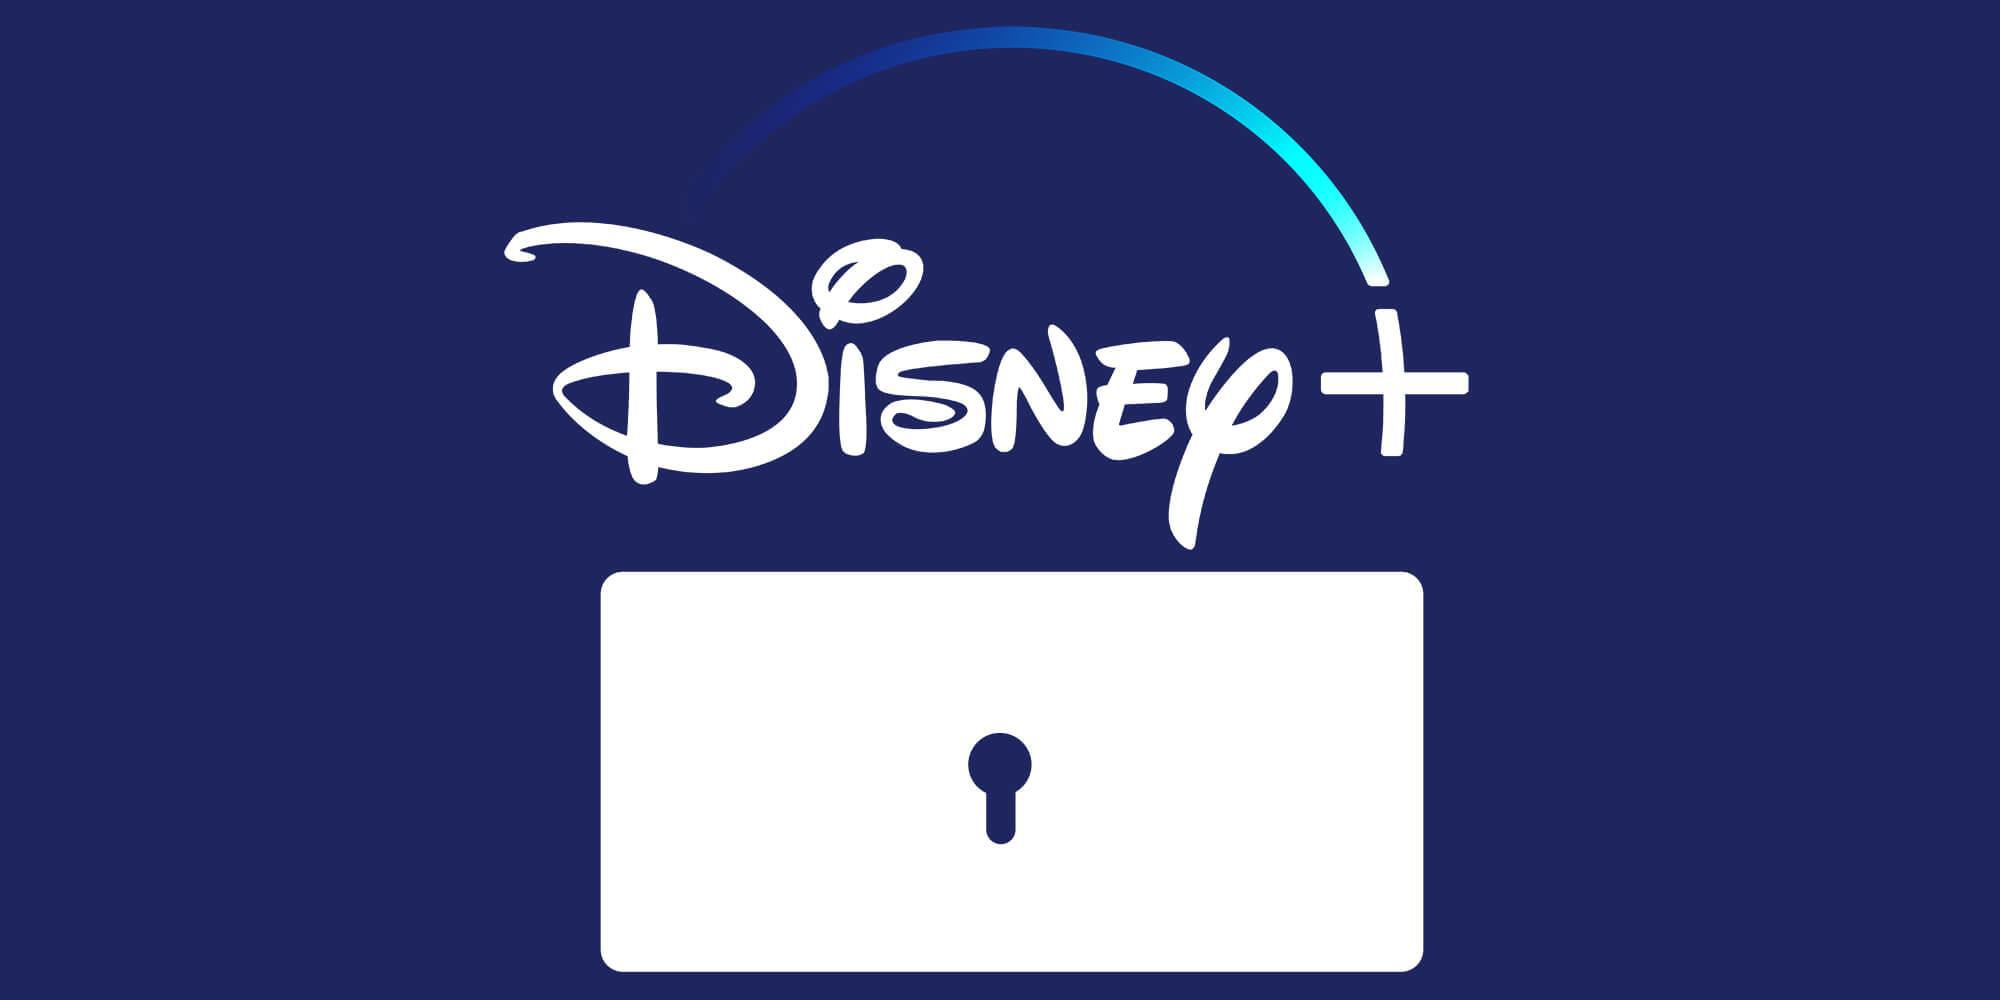 Disney + on up to 10 devices? No, but with some limitations